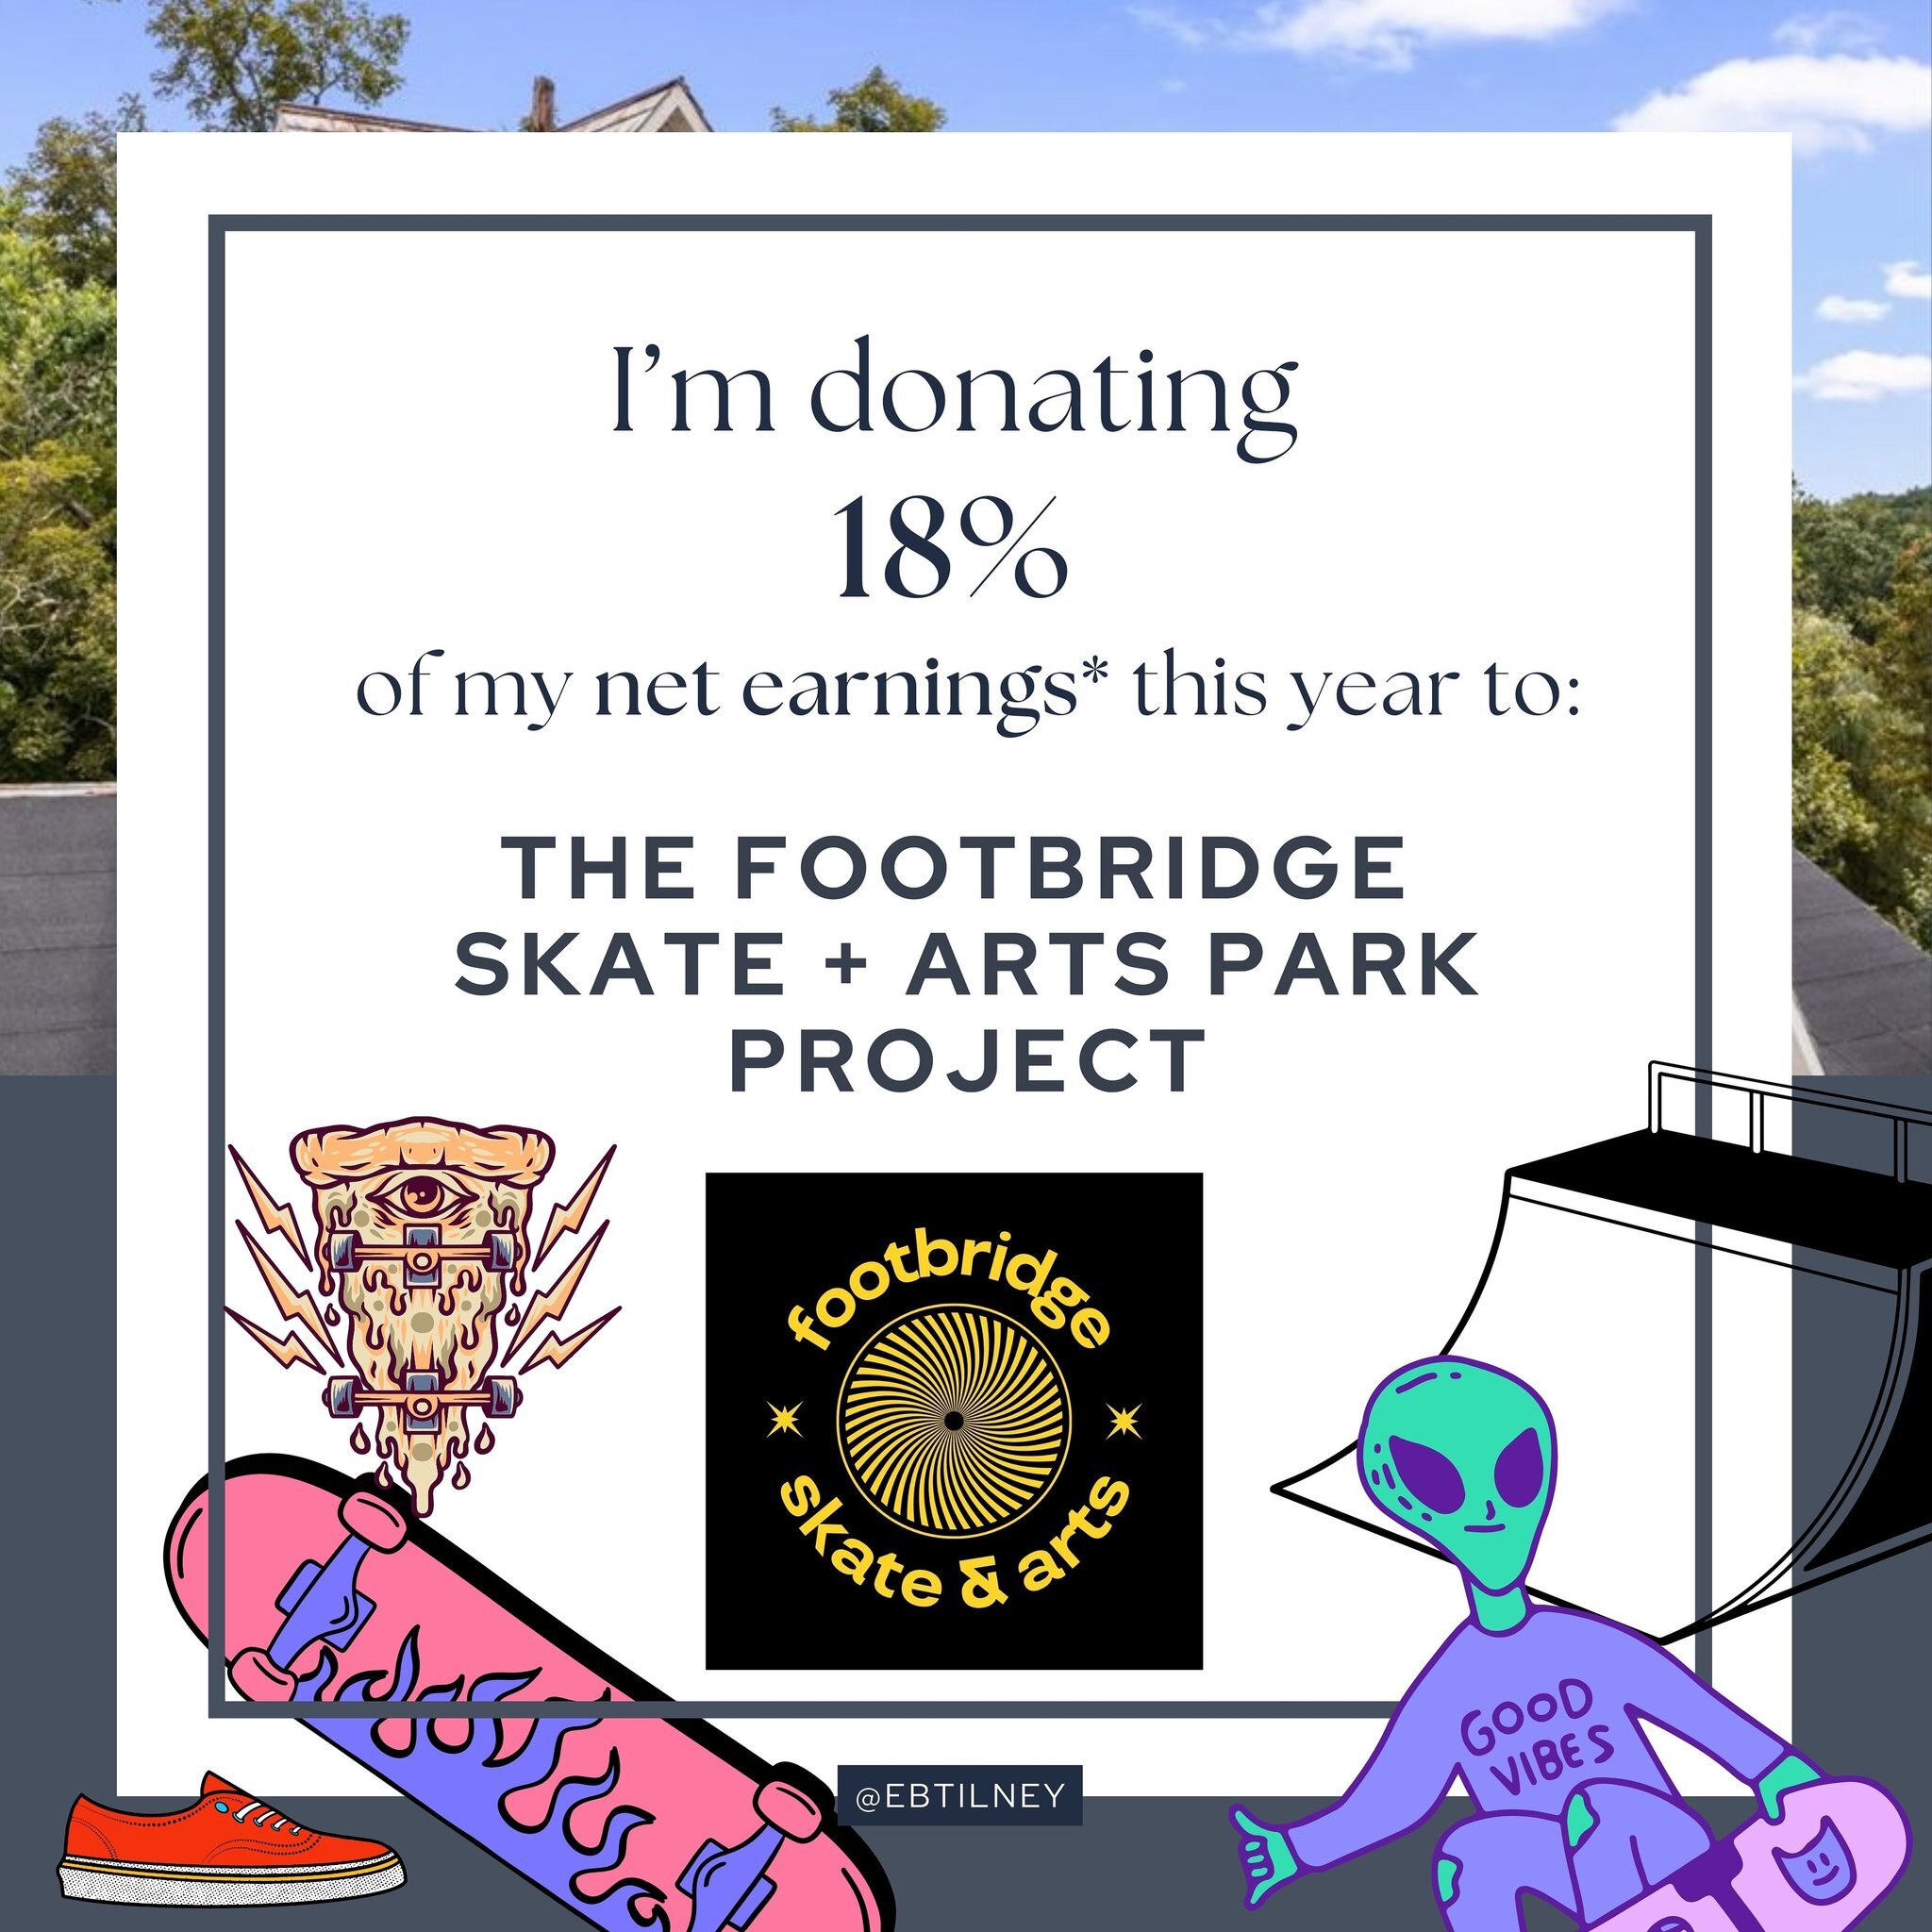 FYI - I&rsquo;m donating 18% of my net earnings for the next year from any community-referred real estate client. The recipient? Footbridge Skate + Arts Park Project- link in bio. 💚🛹🎨🛹💚
.
.
.
.
.
.
.
#njrealestate #footbridge #skatenj #footbridg